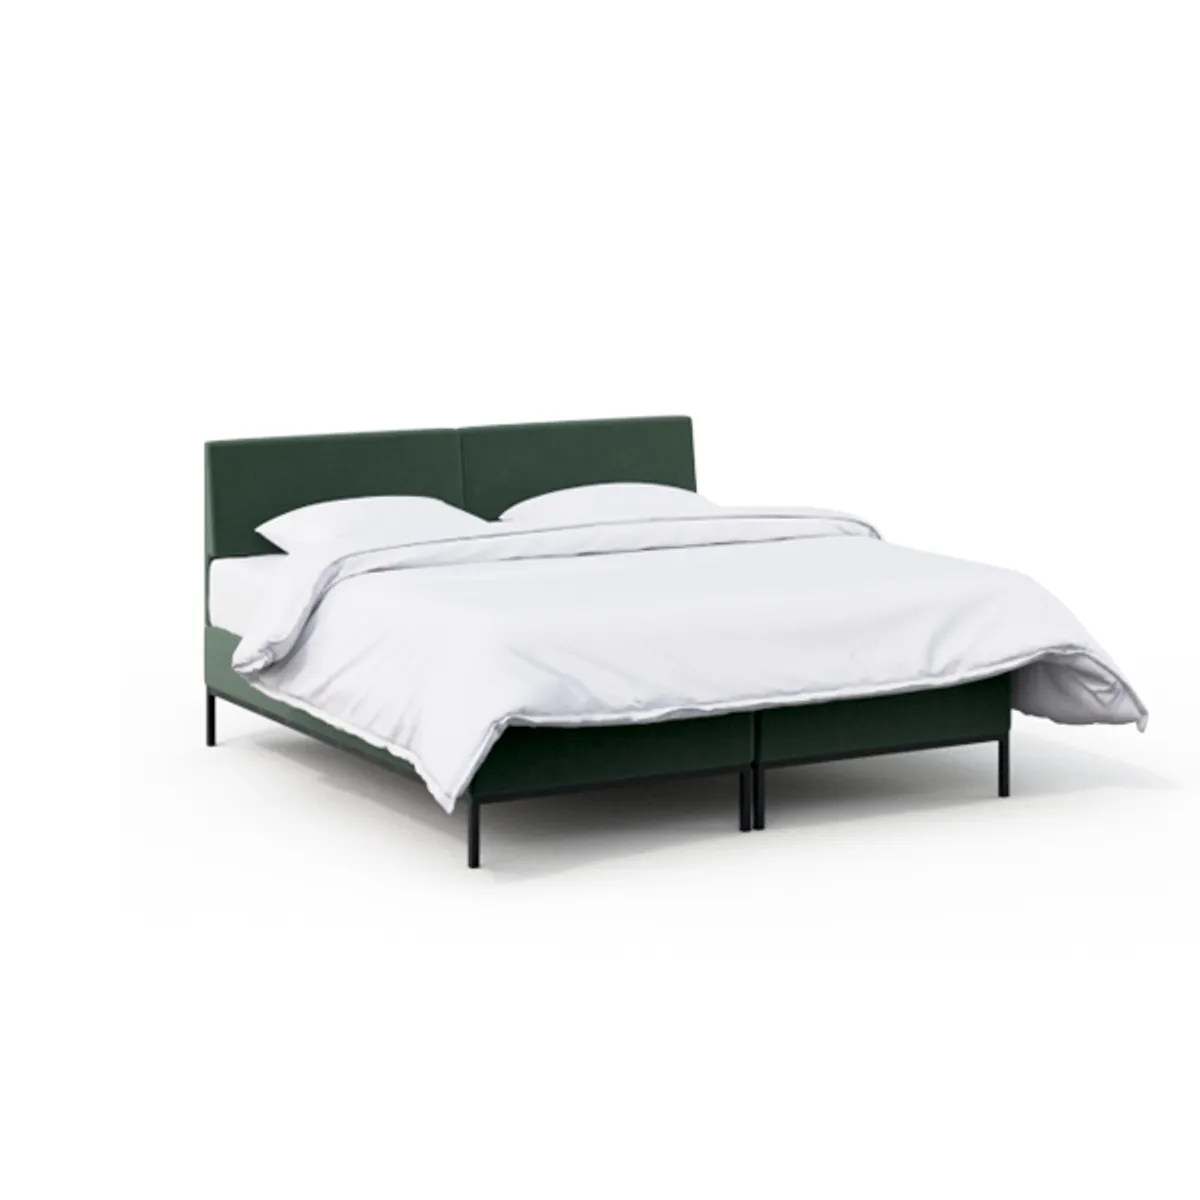 Single bed Inside Out Contracts2